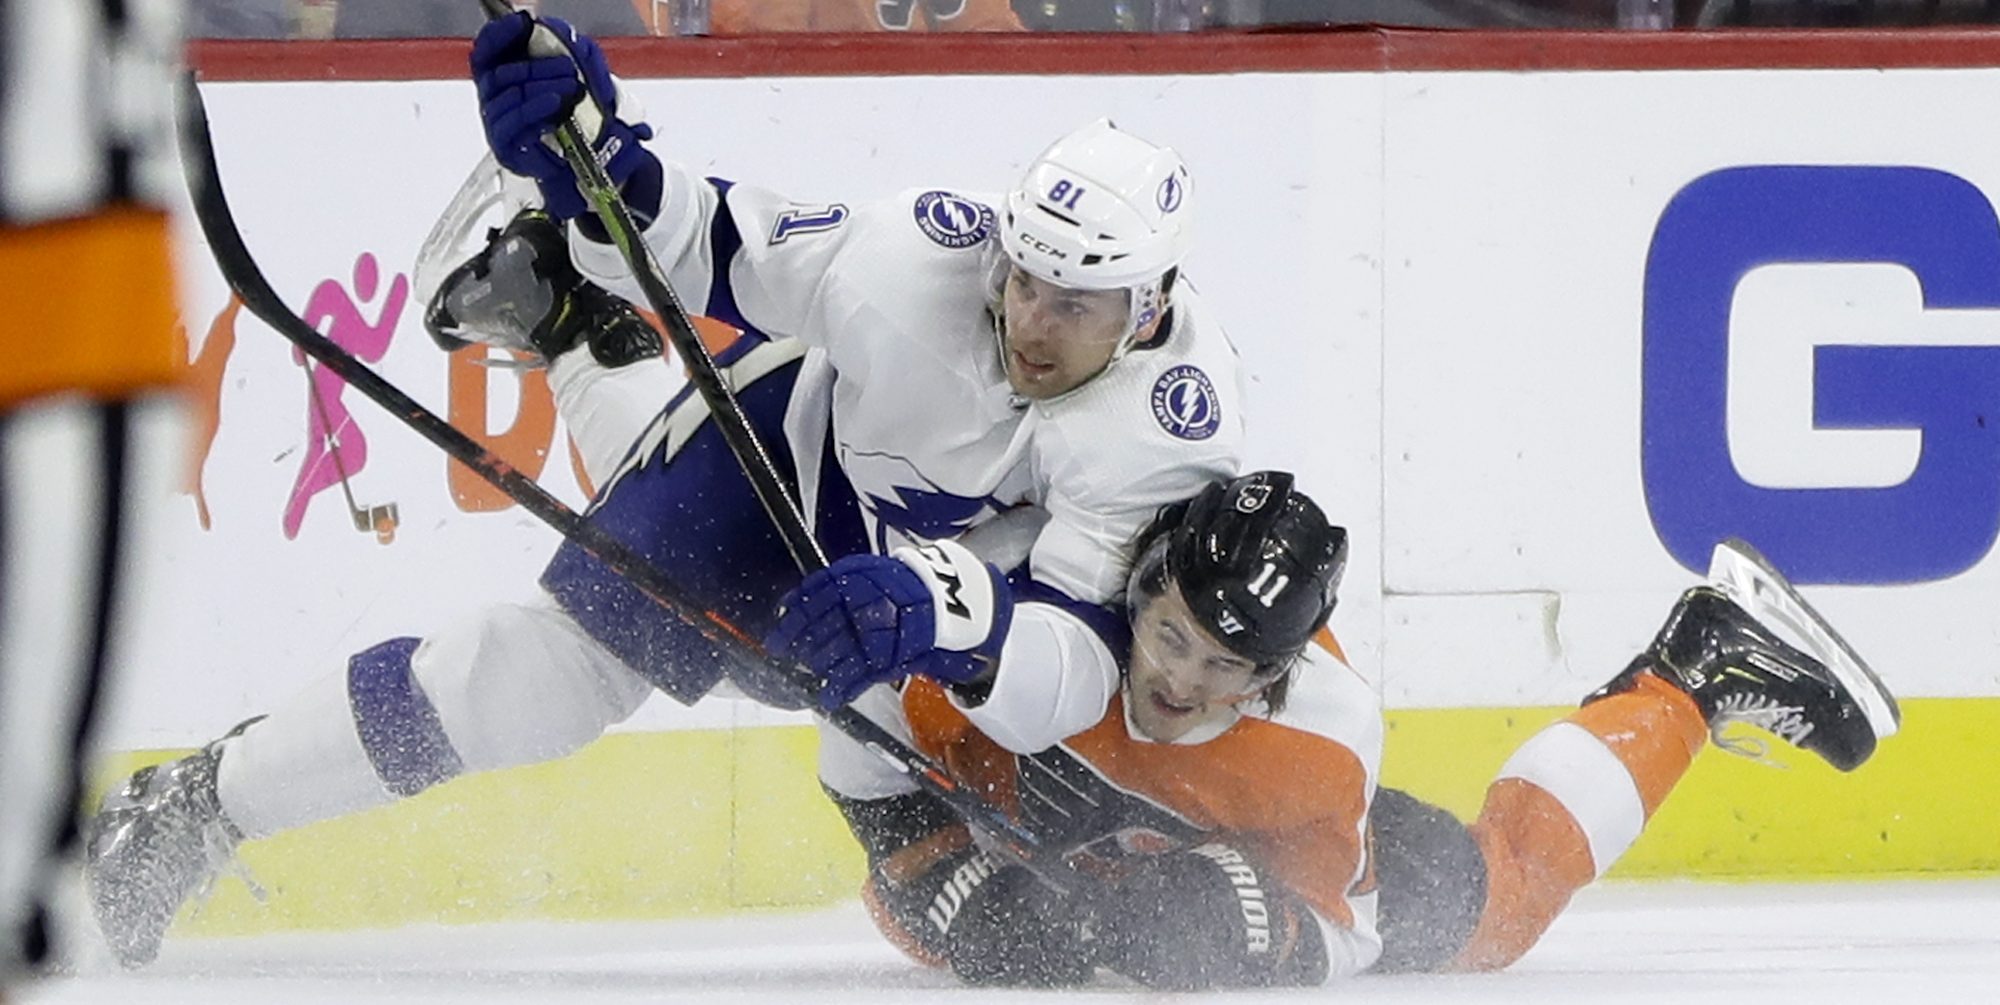 Lightning: Victor Hedman out Tuesday night vs. Flyers